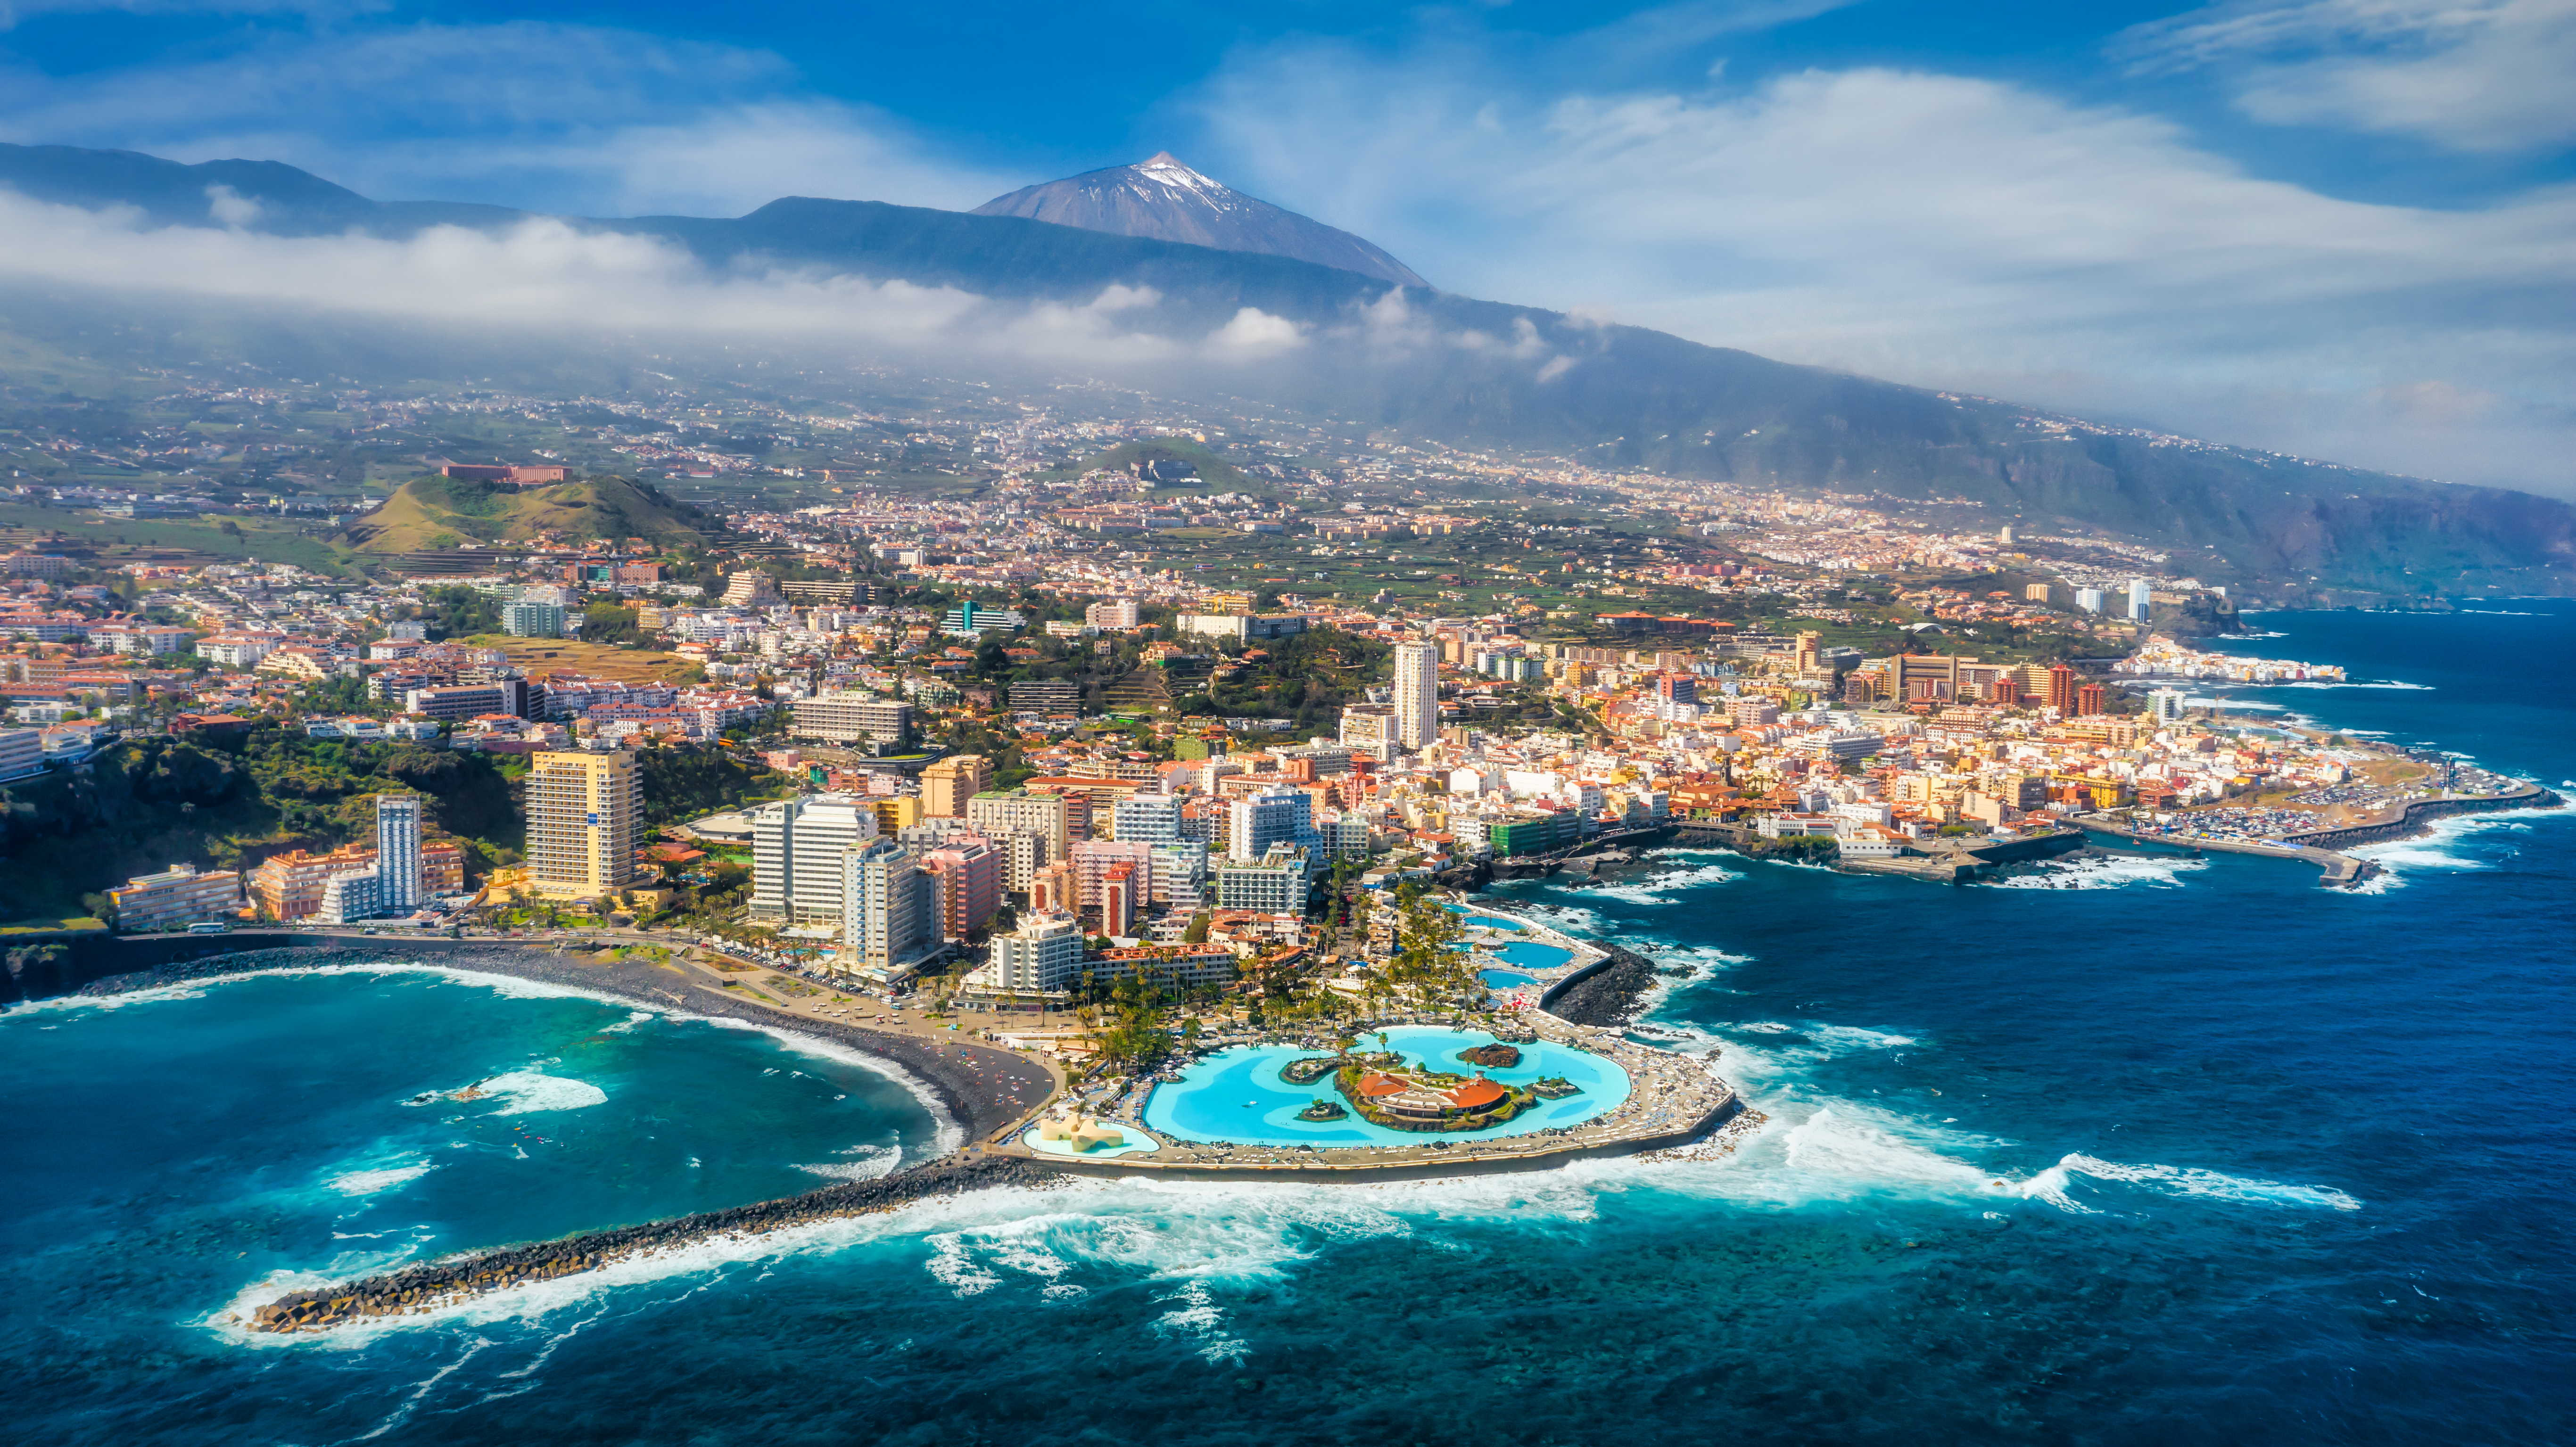 Jump onto a ship to Tenerife with some celebrities this year